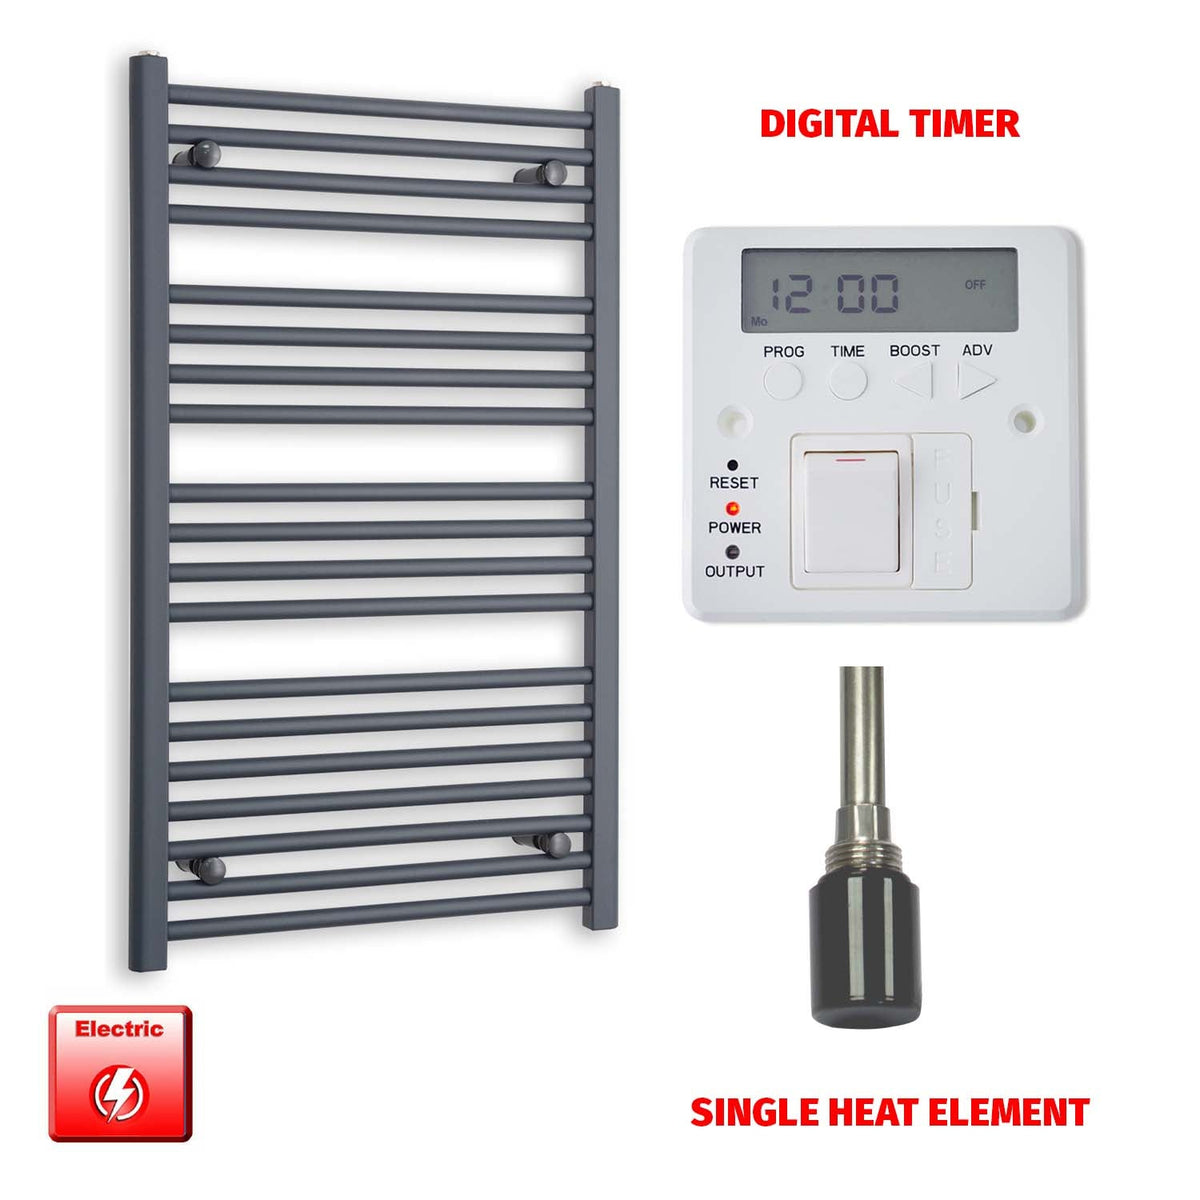 1000mm High 600mm Wide Flat Anthracite Pre-Filled Electric Heated Towel Rail Radiator HTR Single heat element Digital timer